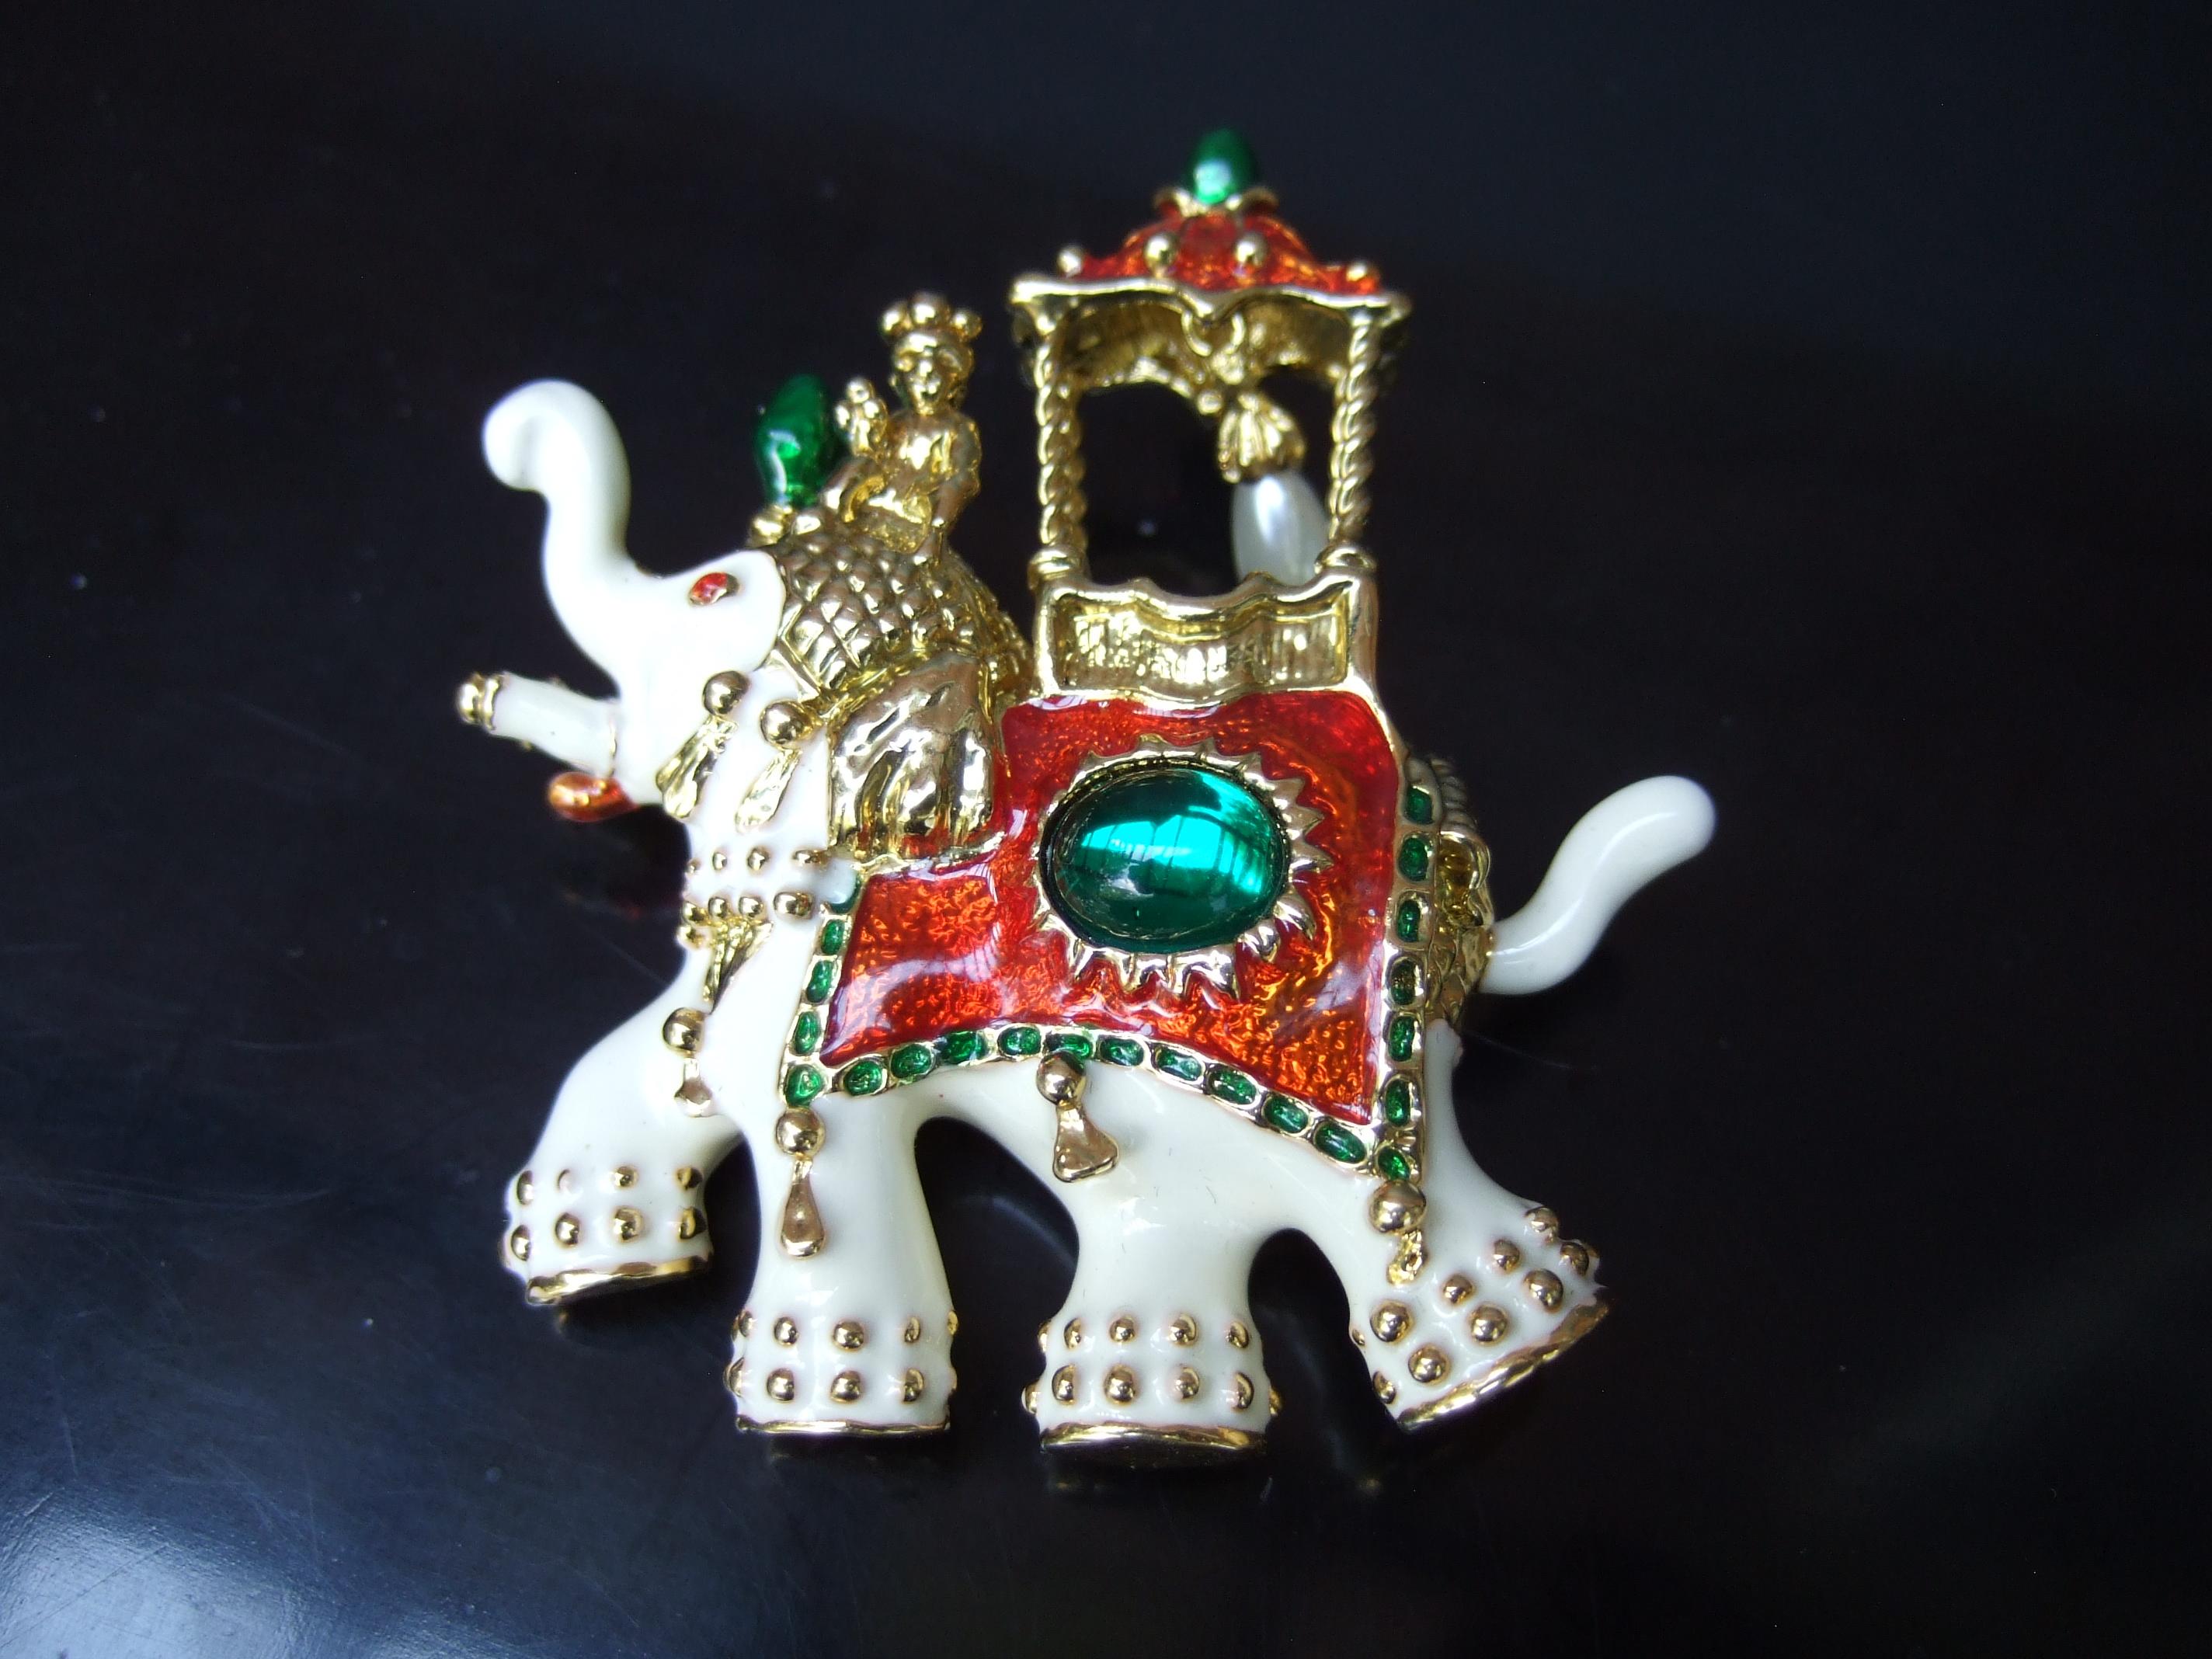 Exotic Gilt Metal Jeweled Enamel Elephant Brooch c 1990s In Good Condition For Sale In University City, MO